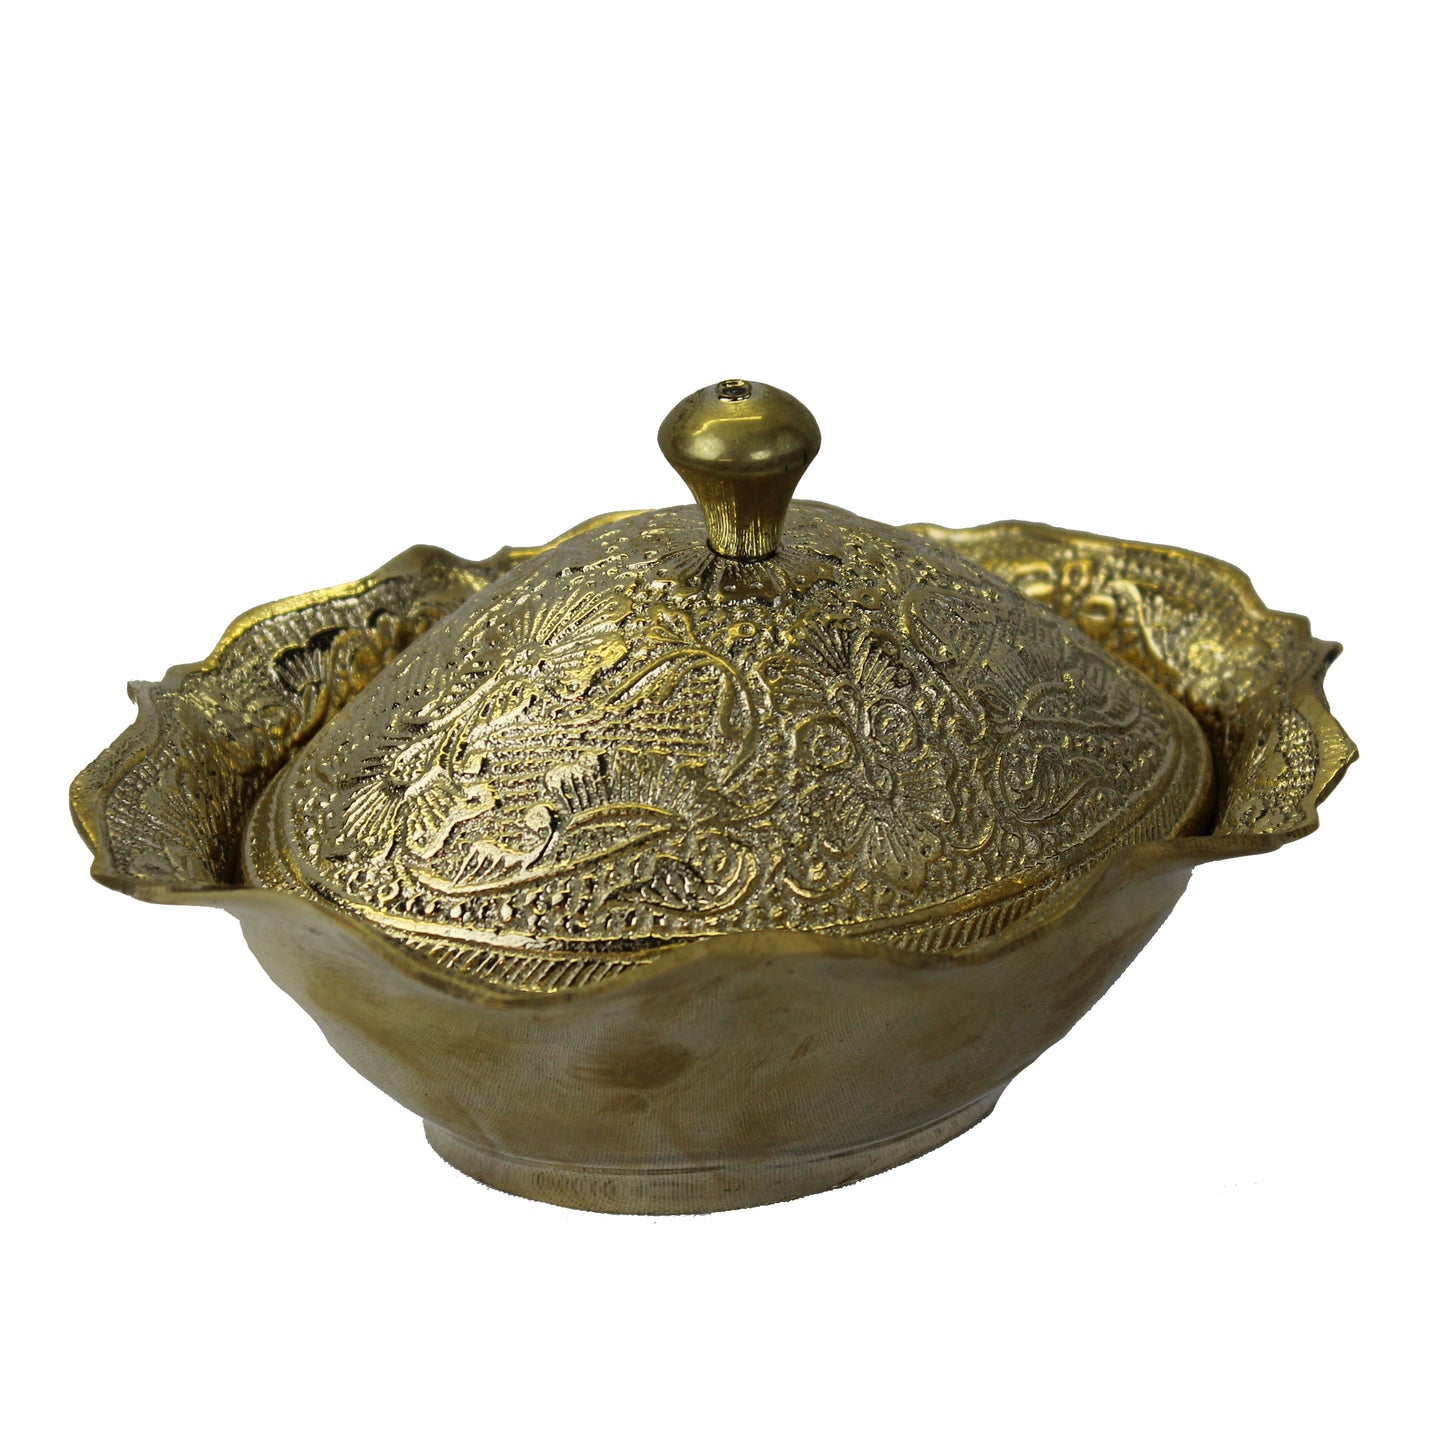 Natural Geo Decorative Golden Brass Pot Oval Bowl with Lid